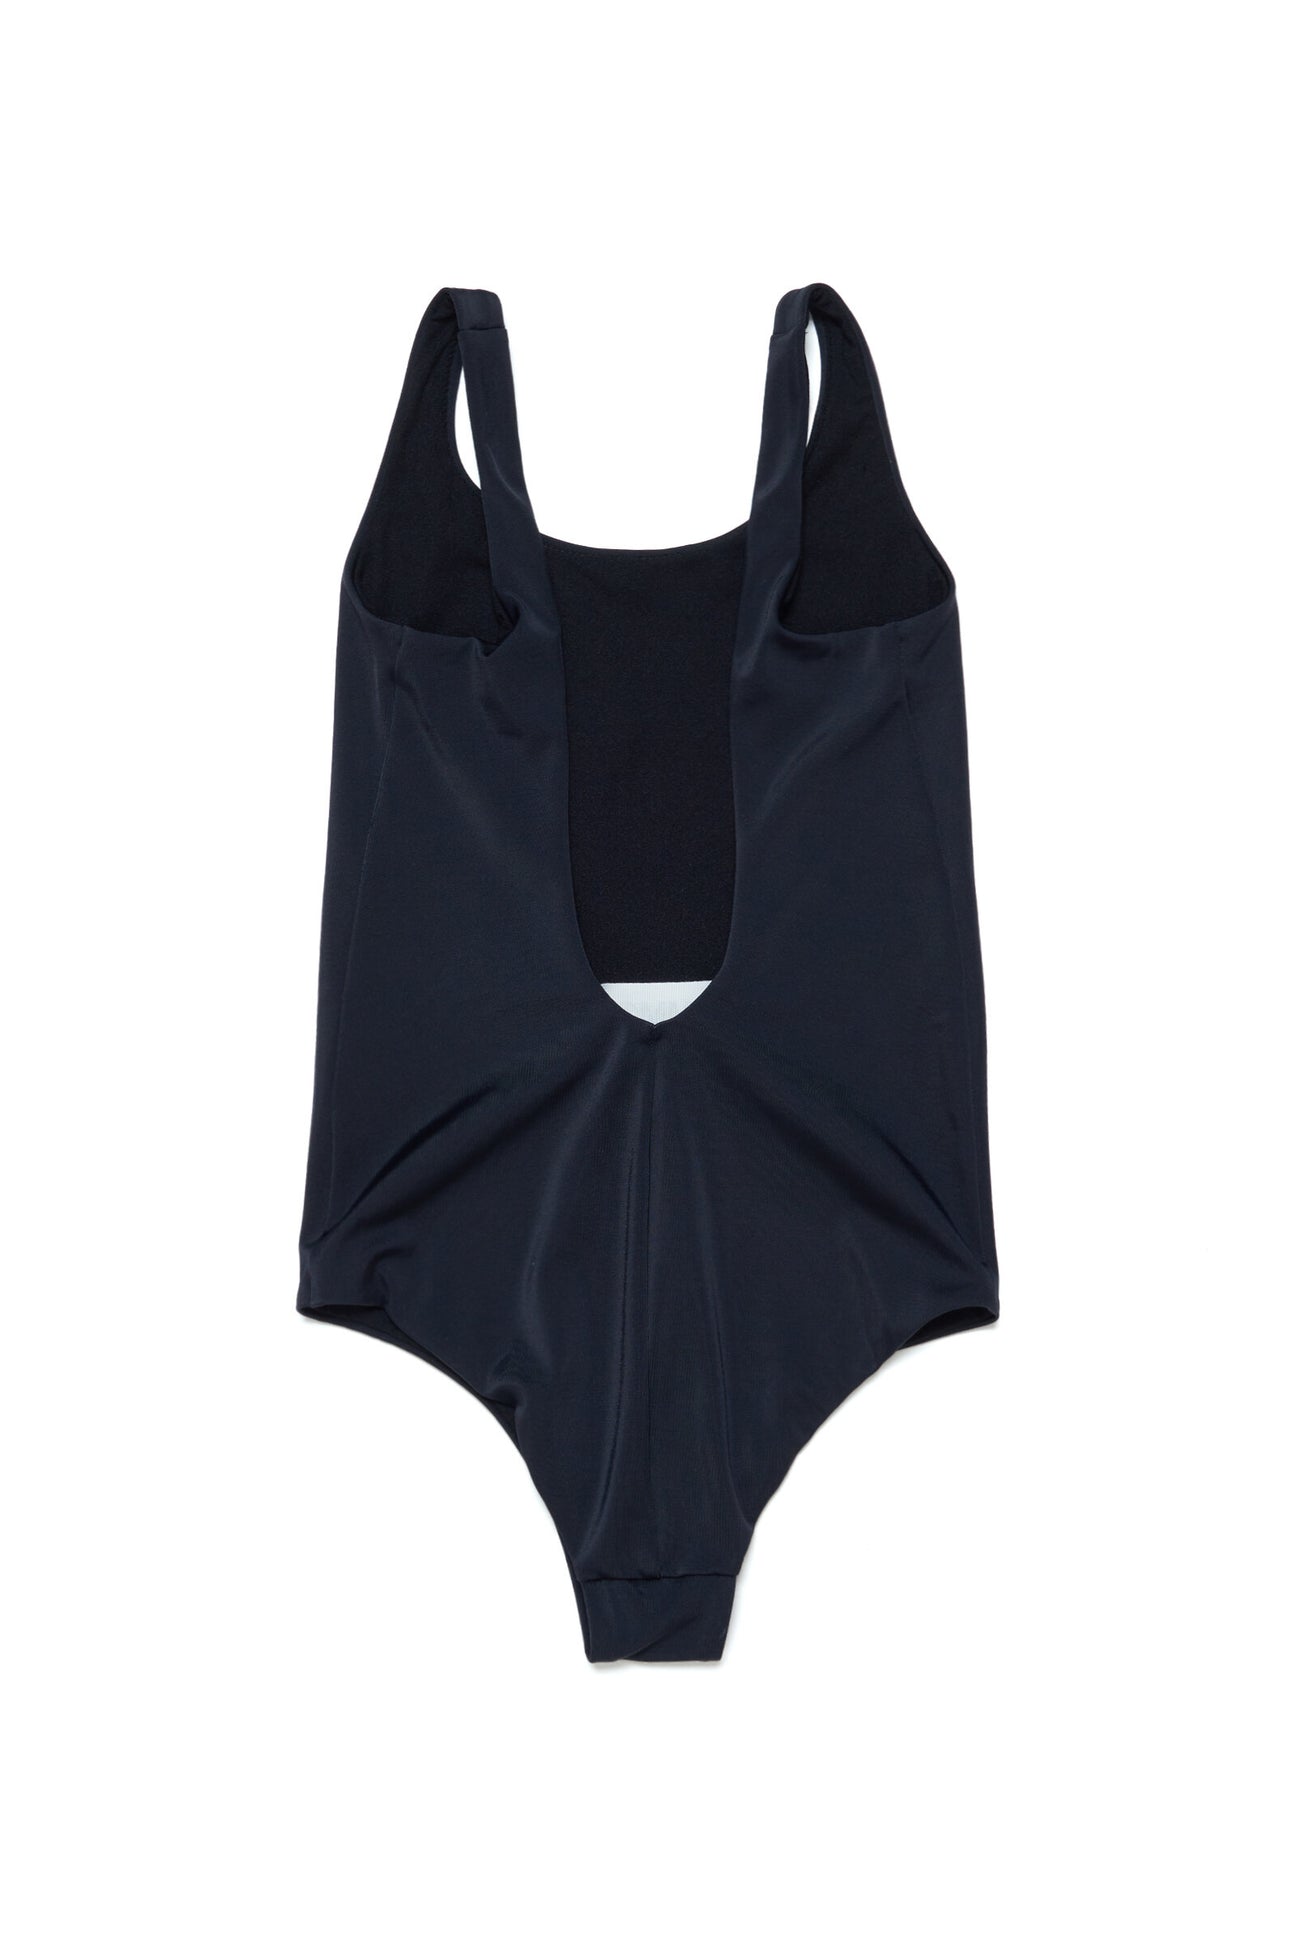 Sporty black one-piece swimming costume with minimal logo Sporty black one-piece swimming costume with minimal logo